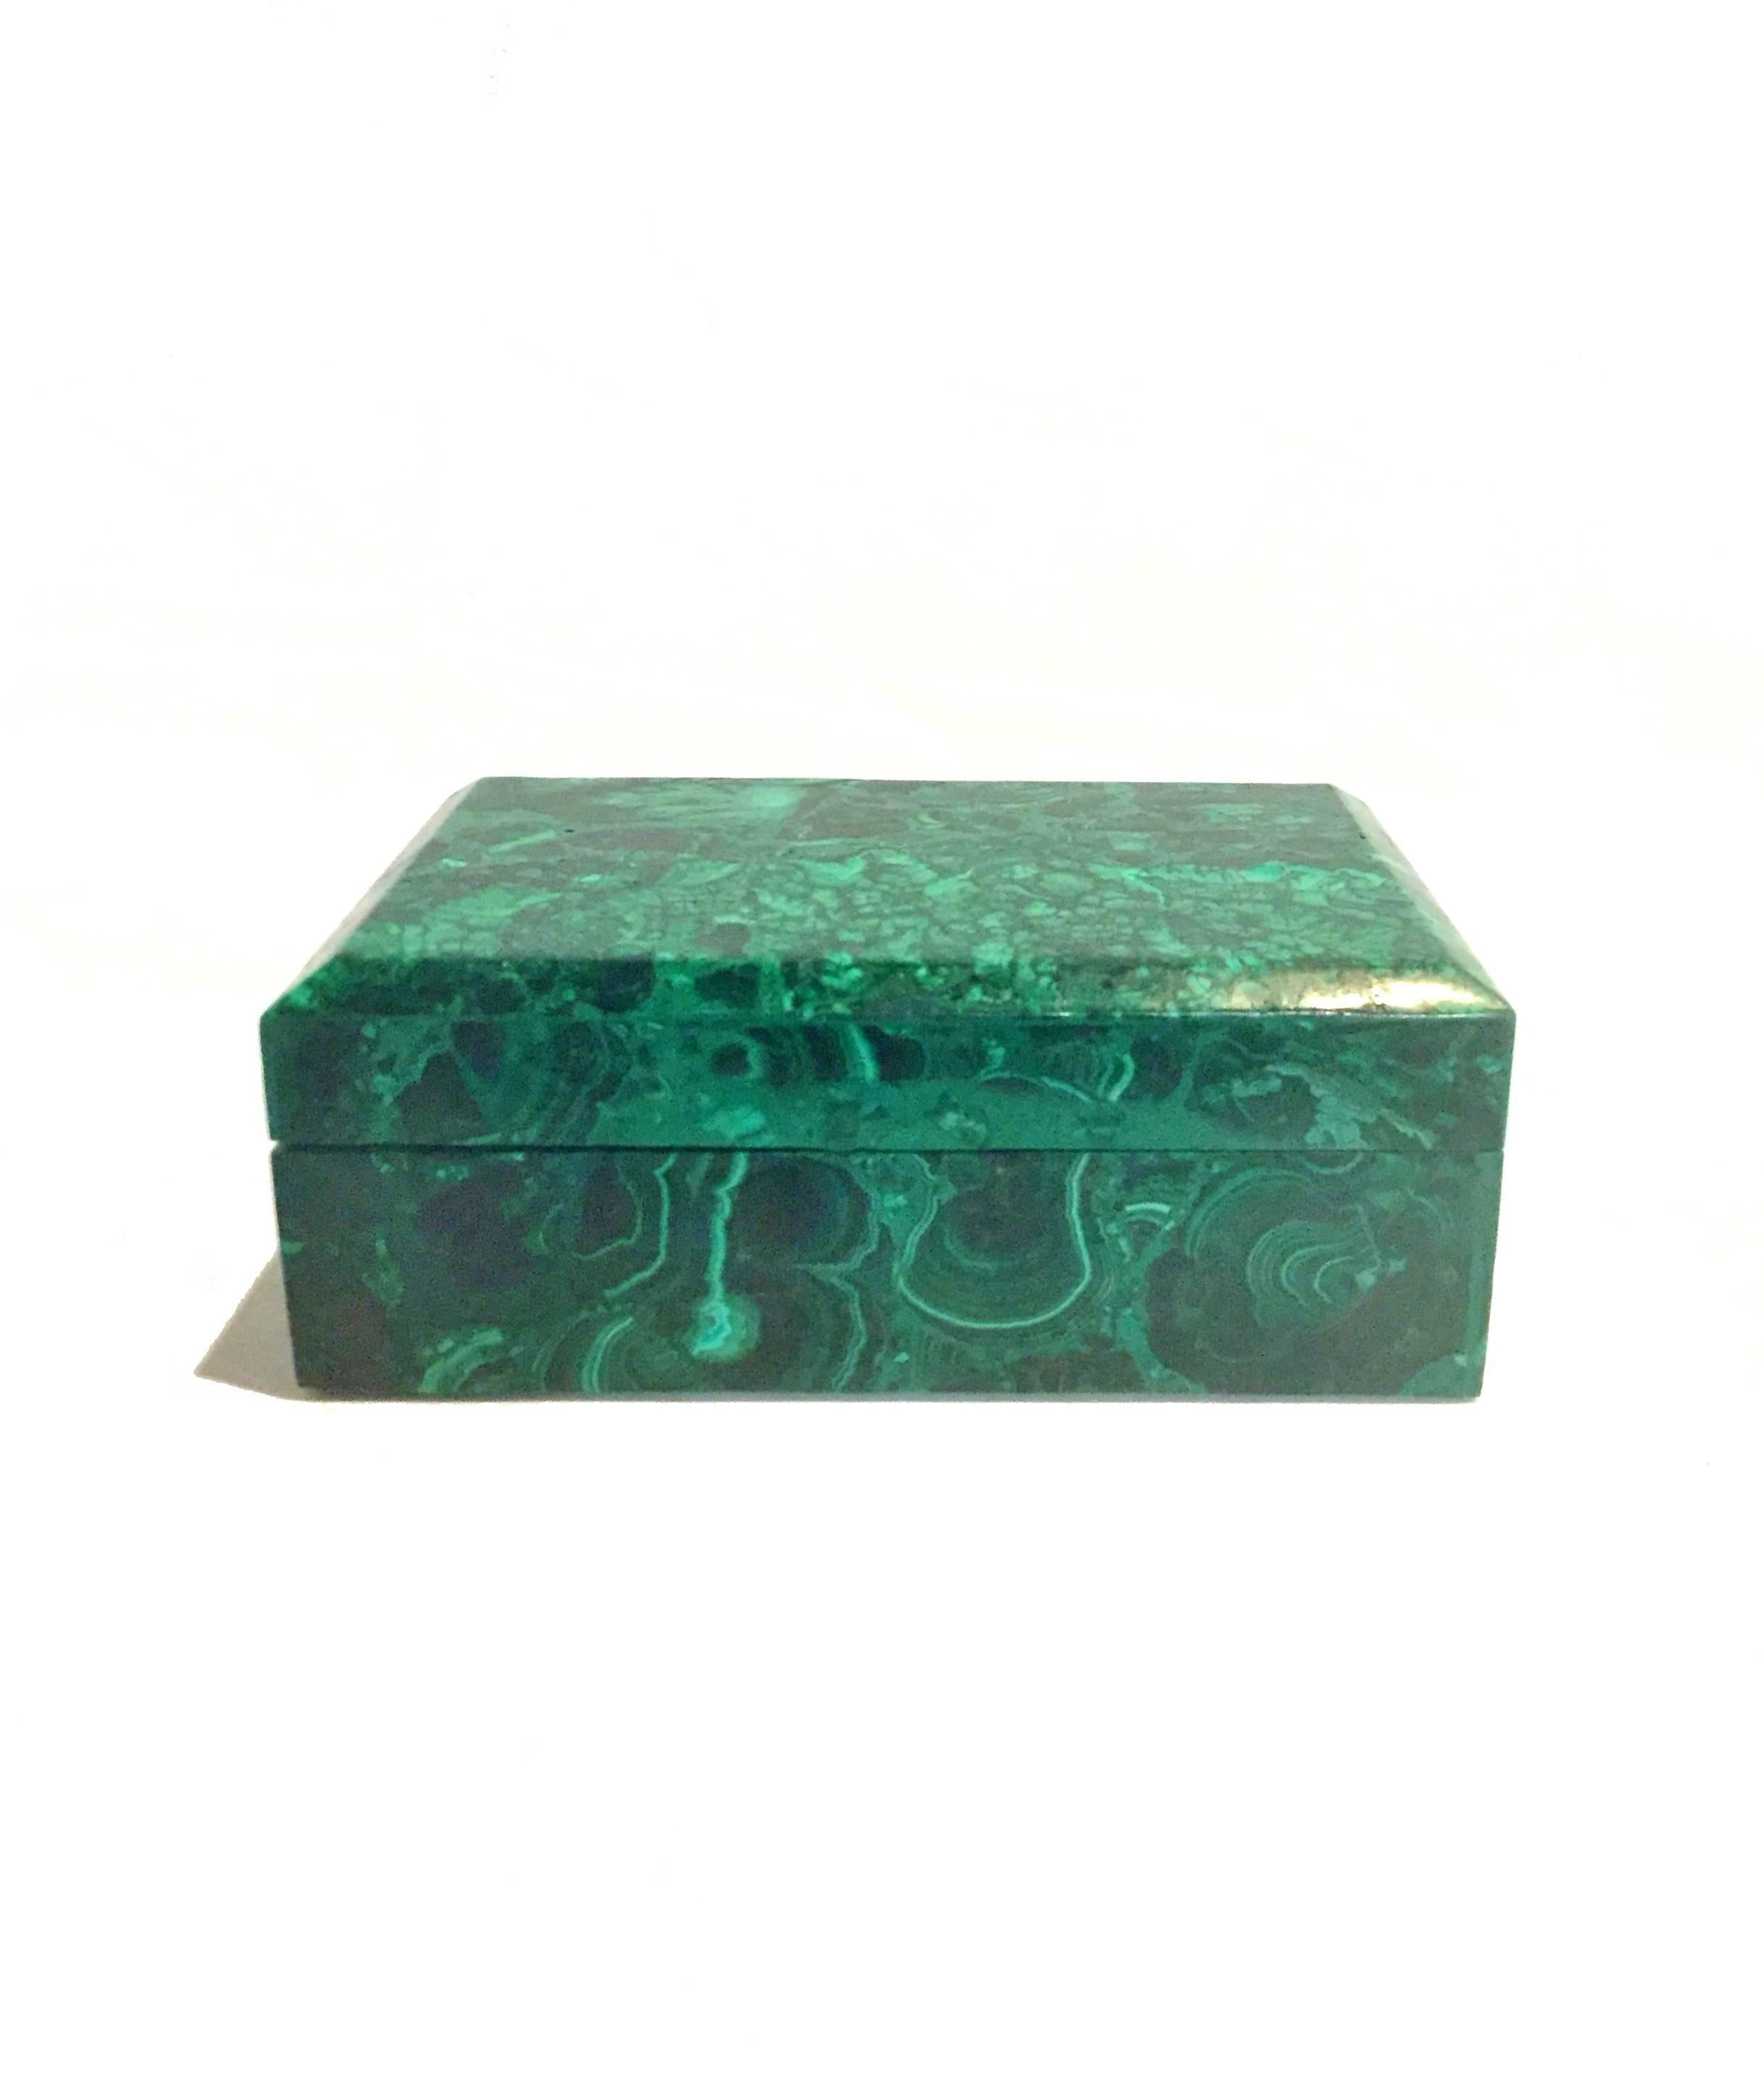 This extraordinary box is made with the most beautiful malachite. All natural with splendid swirls and patterns, this remarkable piece is a sophisticated addition to your desk.

Malachite is a stone of transformation, helping one achieve balance